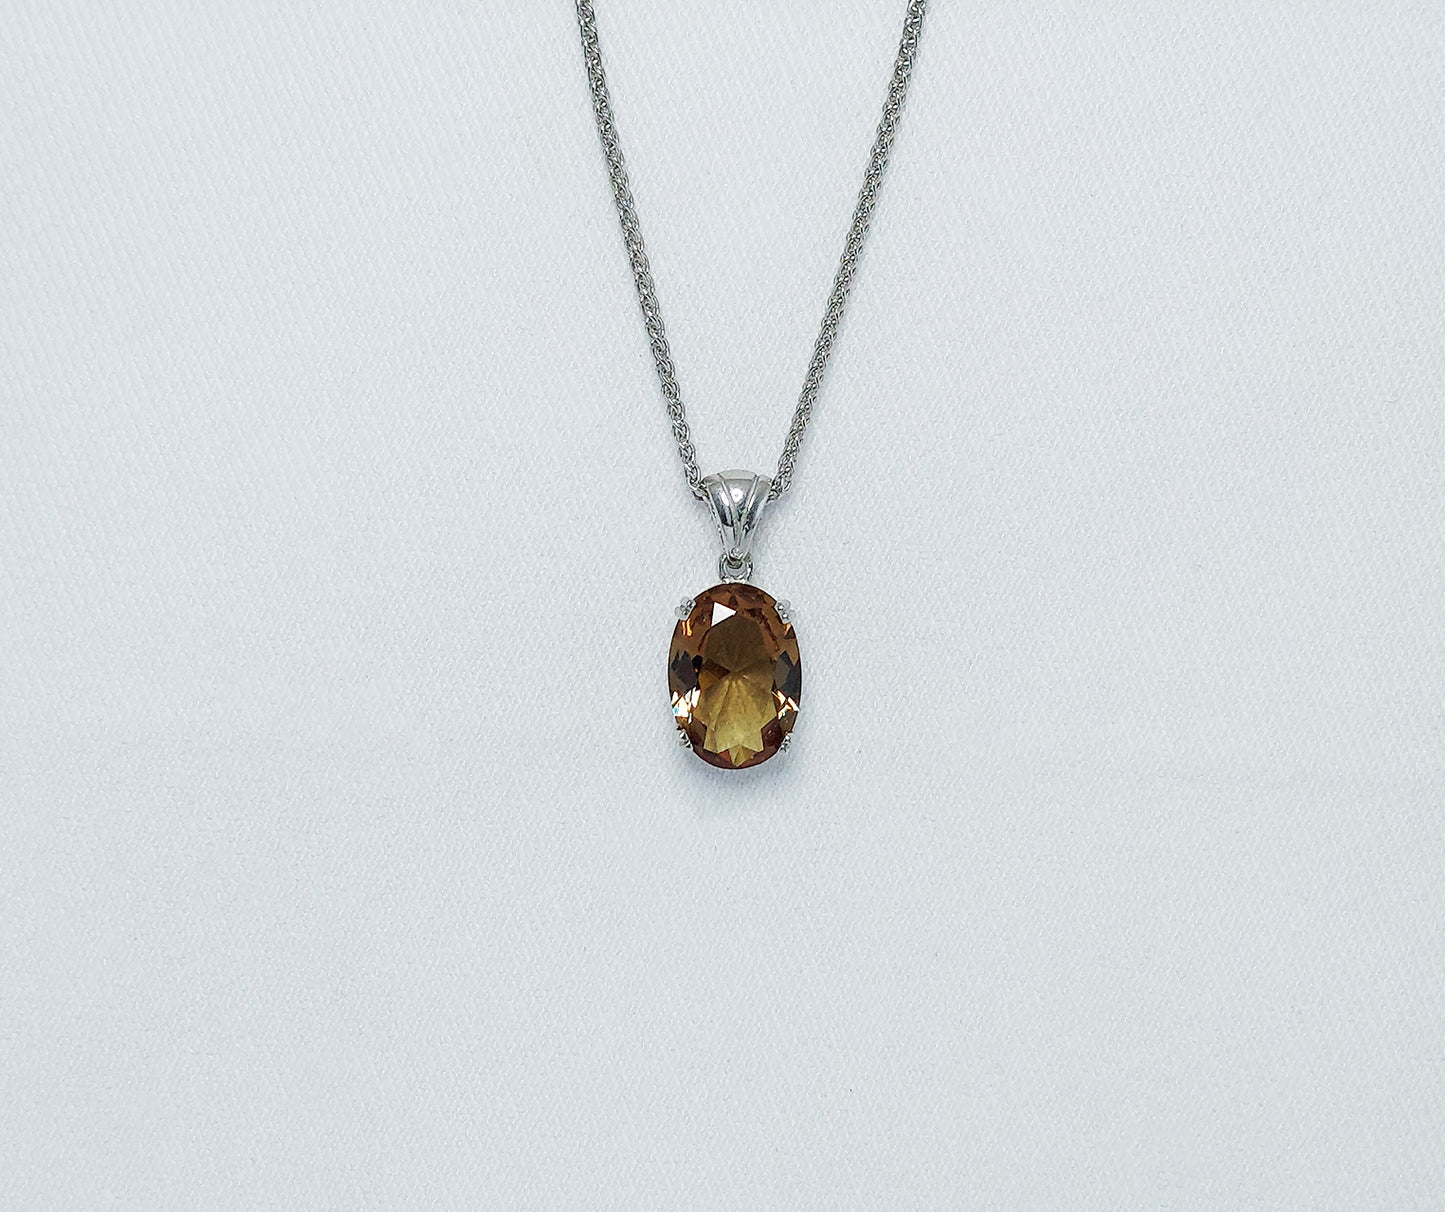 Sterling Silver Pendant with Zultanite Stone 